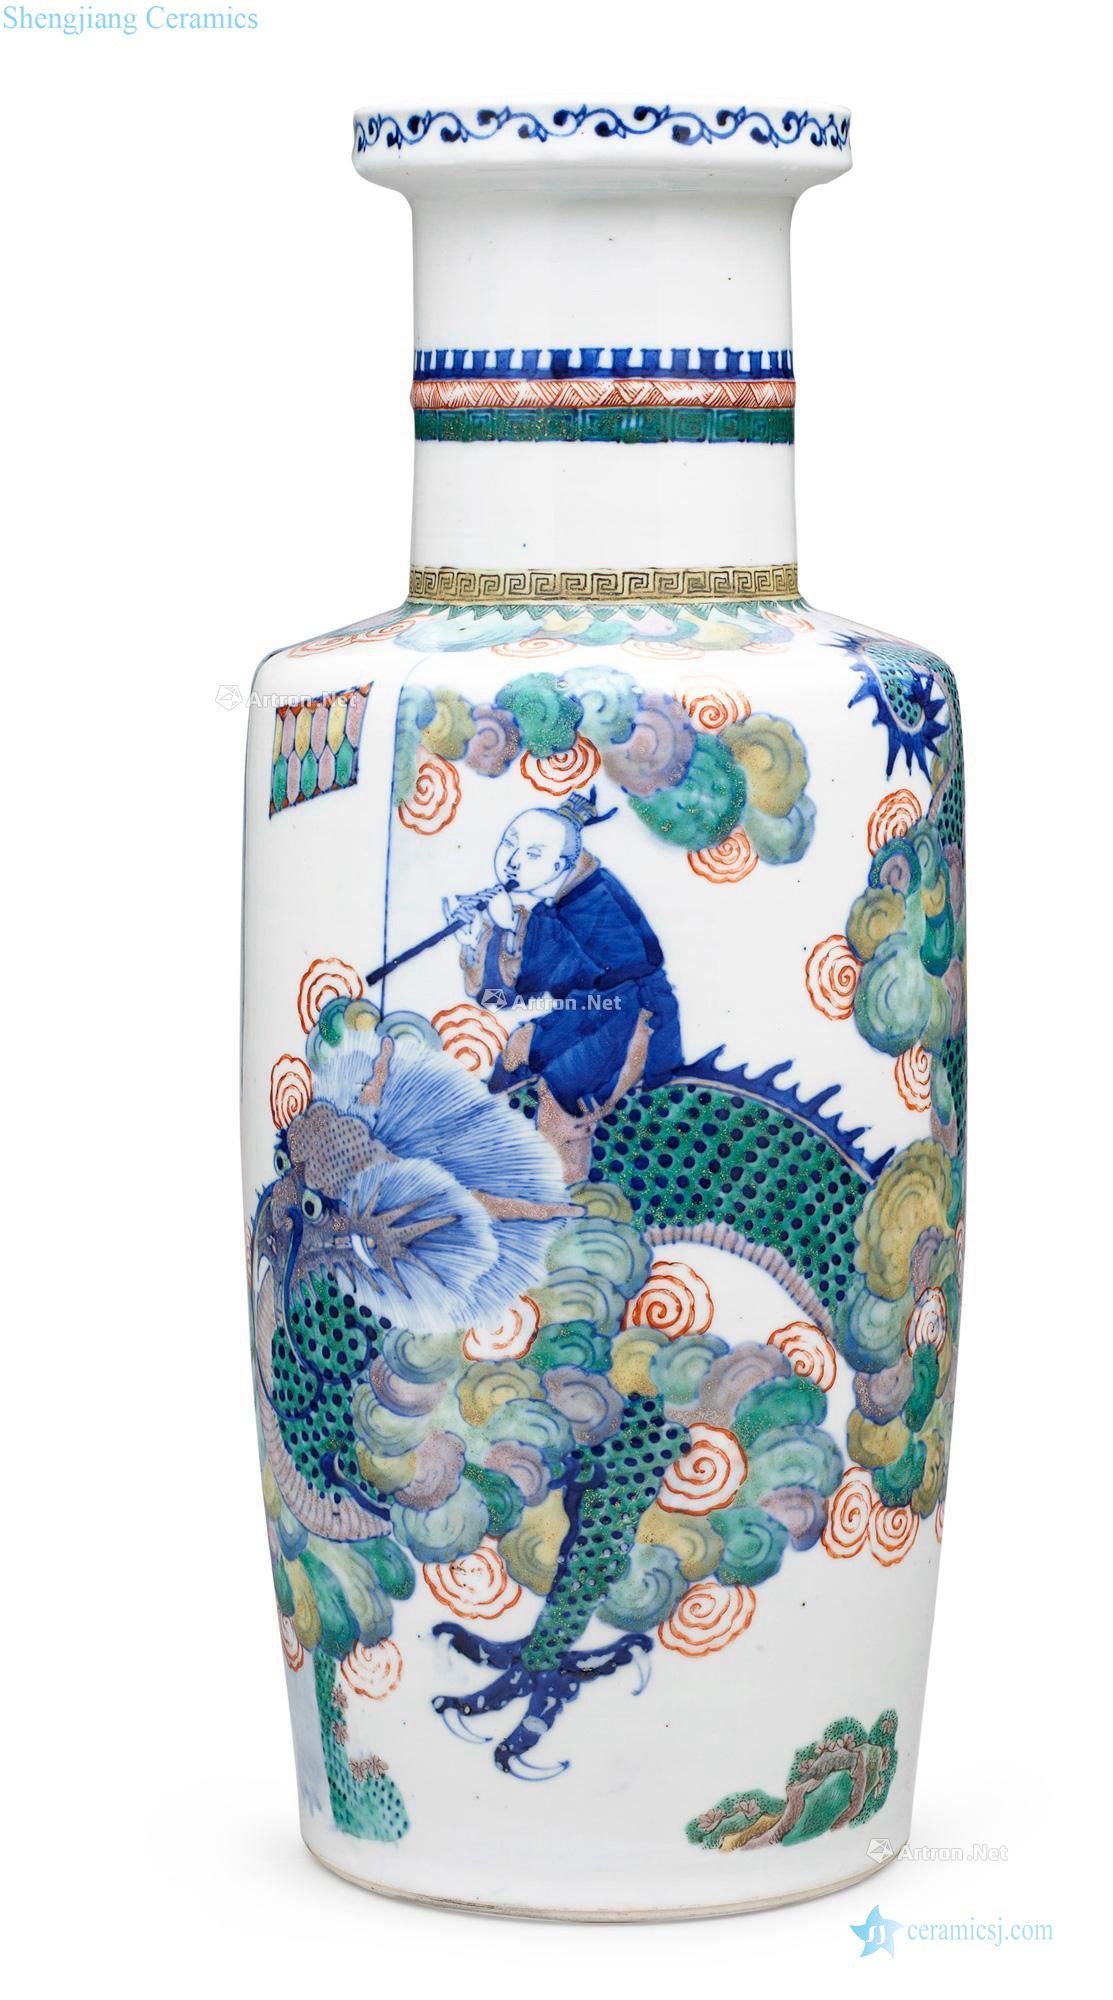 The late qing dynasty colorful figure who bottle on a "pipe"